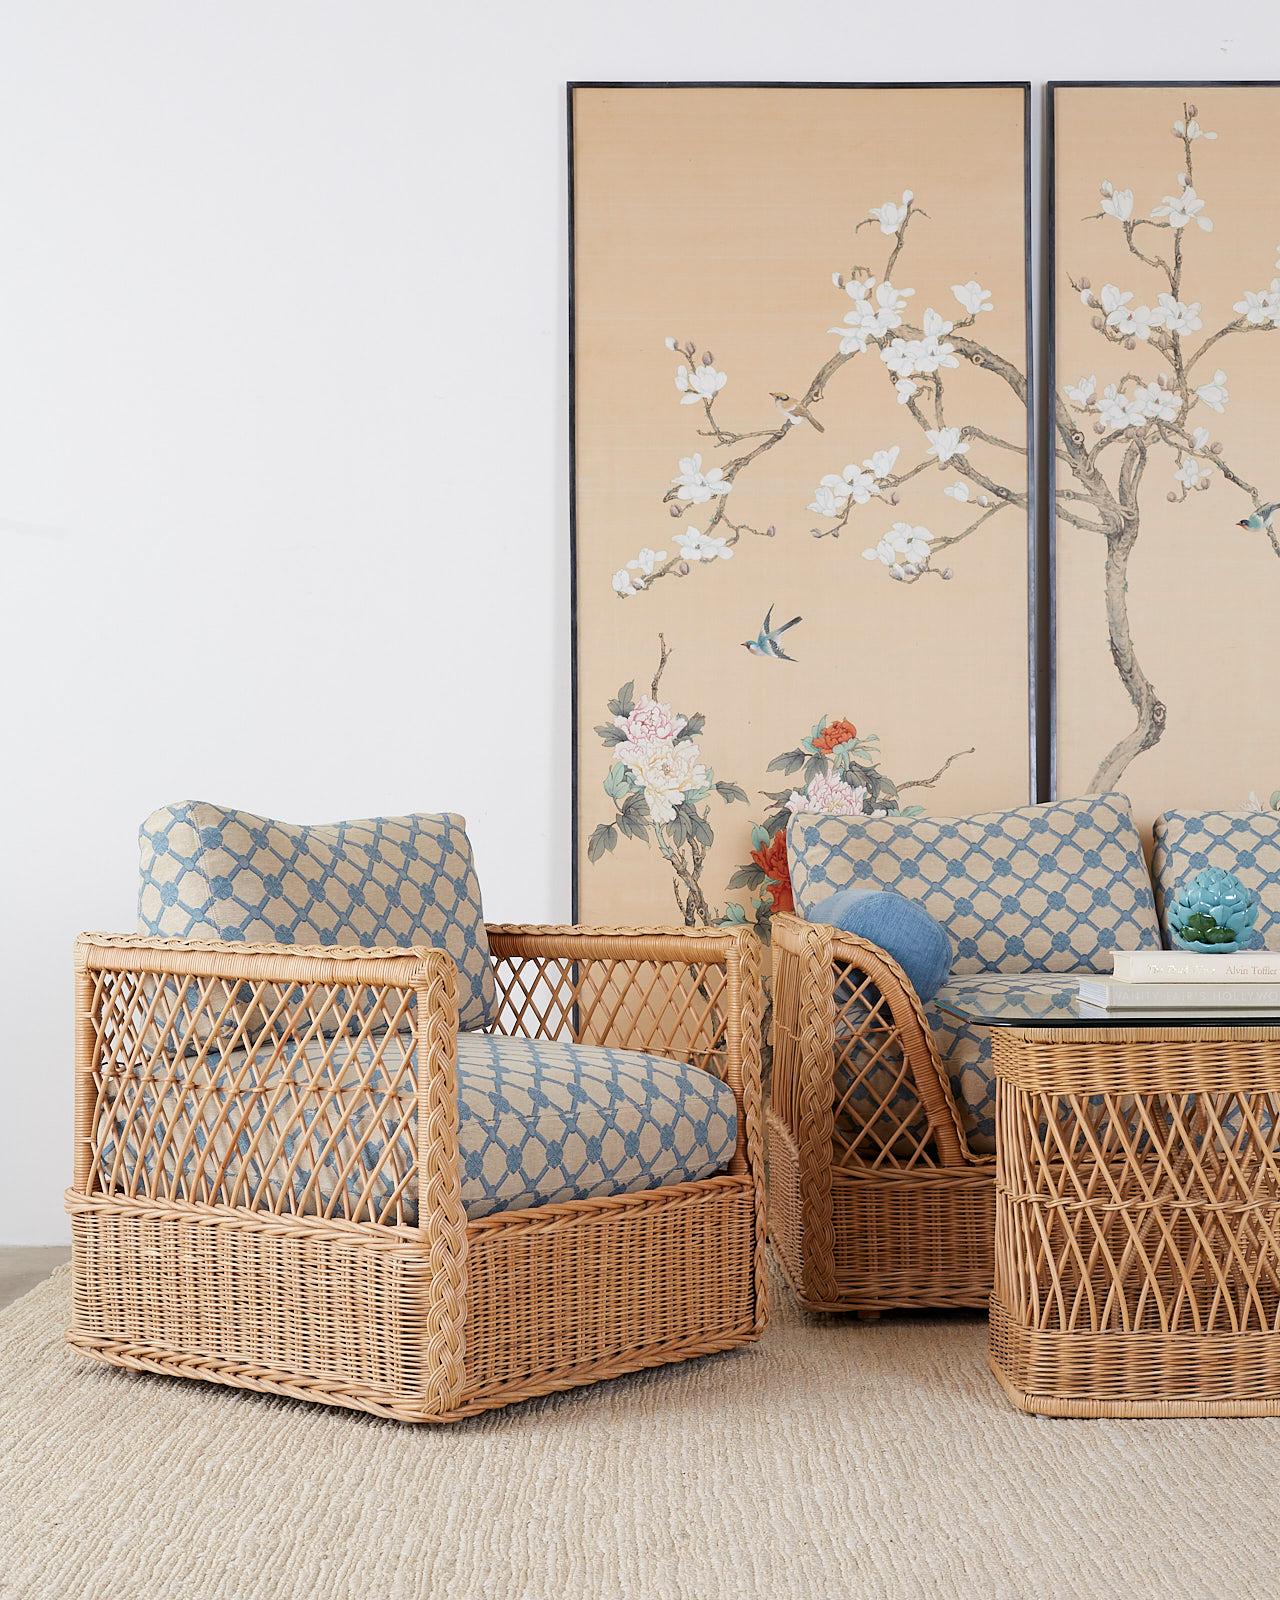 Rare pair of California organic modern style rattan wicker cube lounge chairs or club chairs made by McGuire. Features a cube style rattan and wood frame covered with woven wicker. The bottoms have a tight weave pattern while the tops of the side